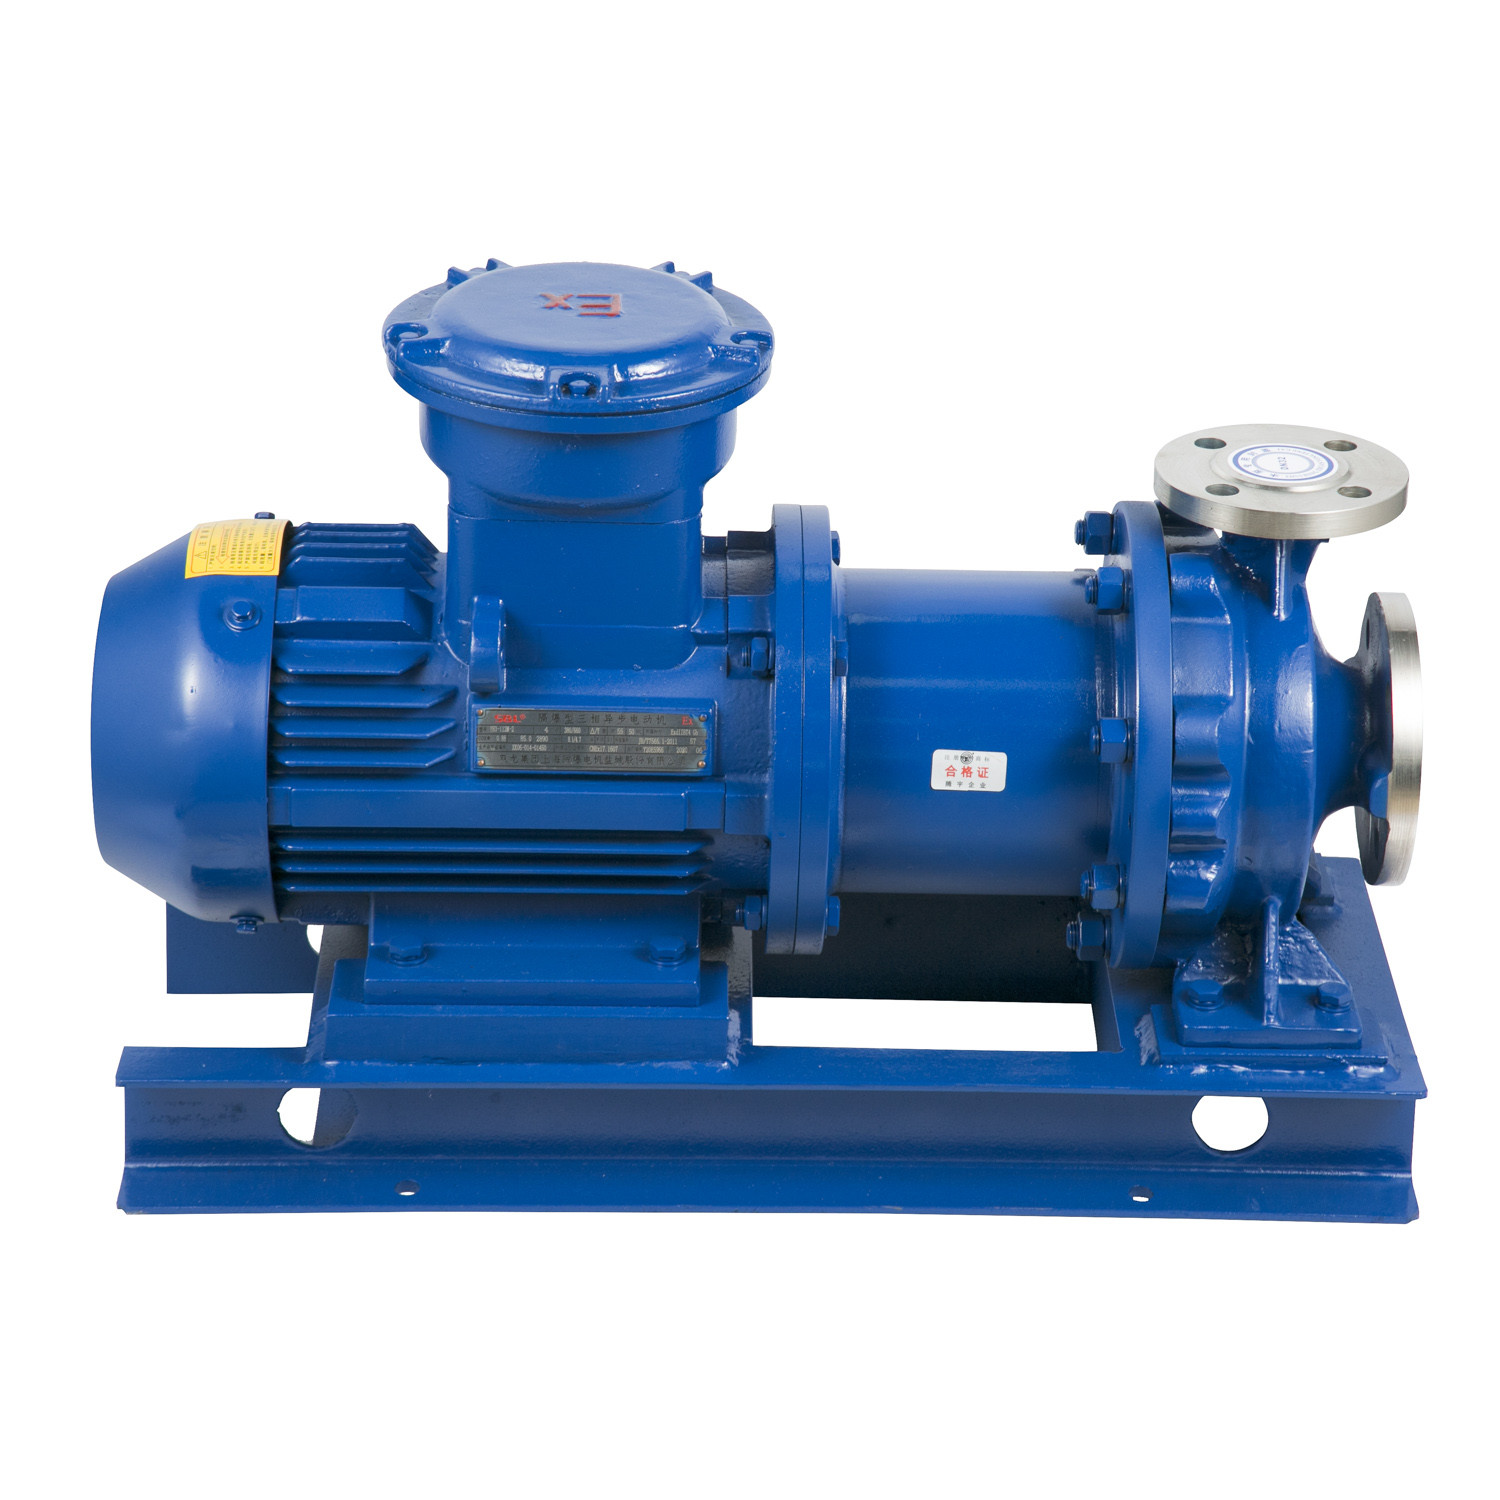 A basic introduction to Magnetic Drive Pumps